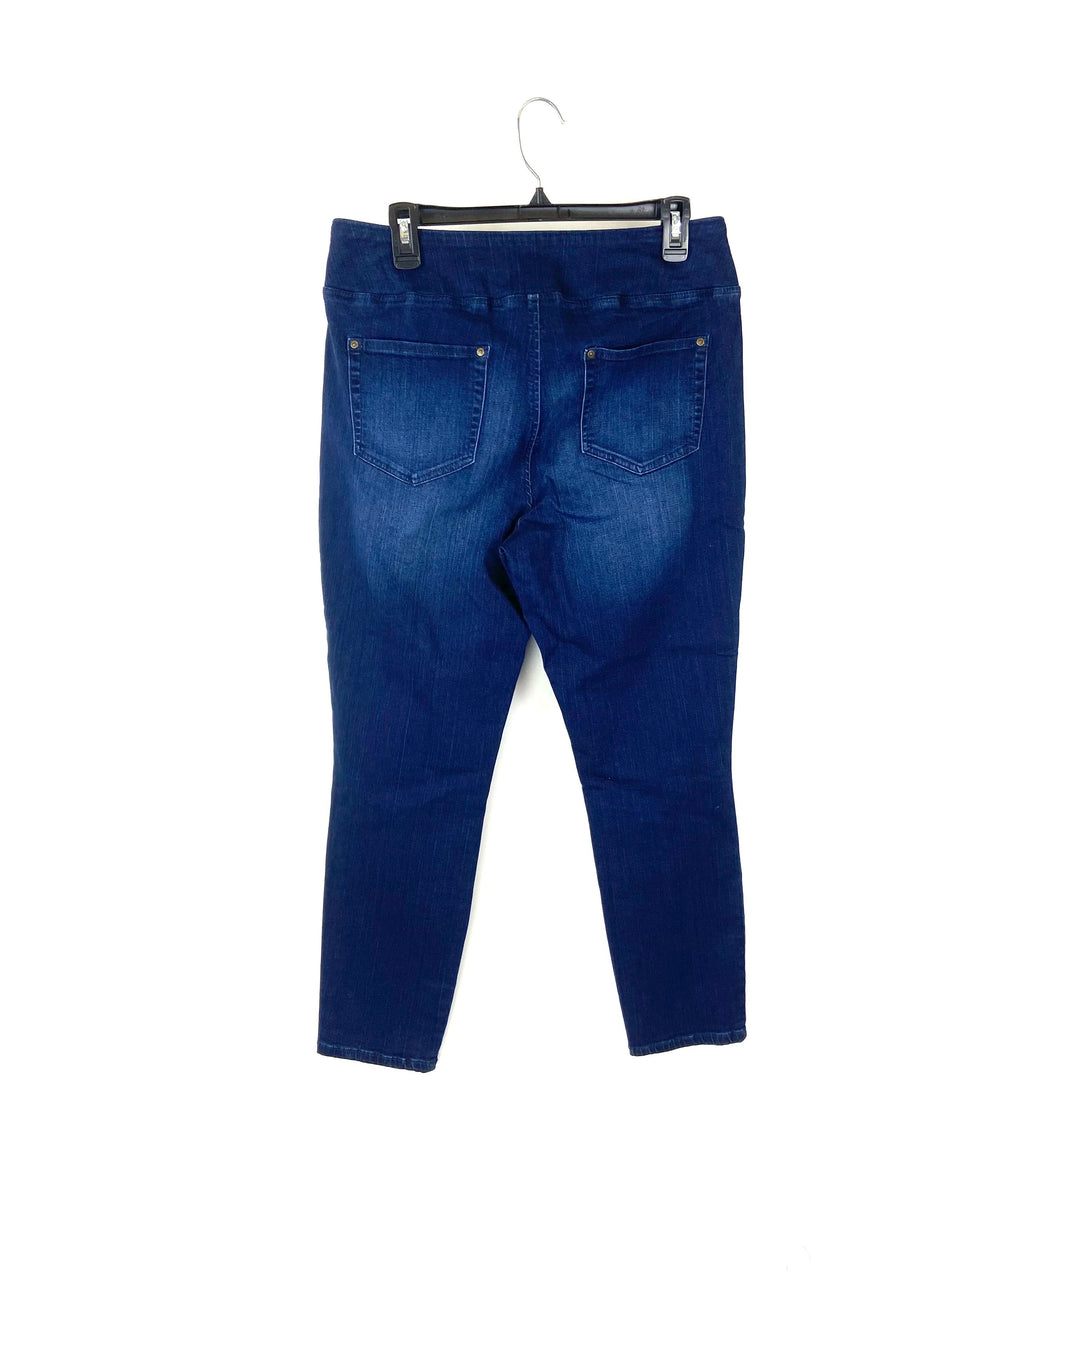 Midnight Blue Jeans - Size 12/14